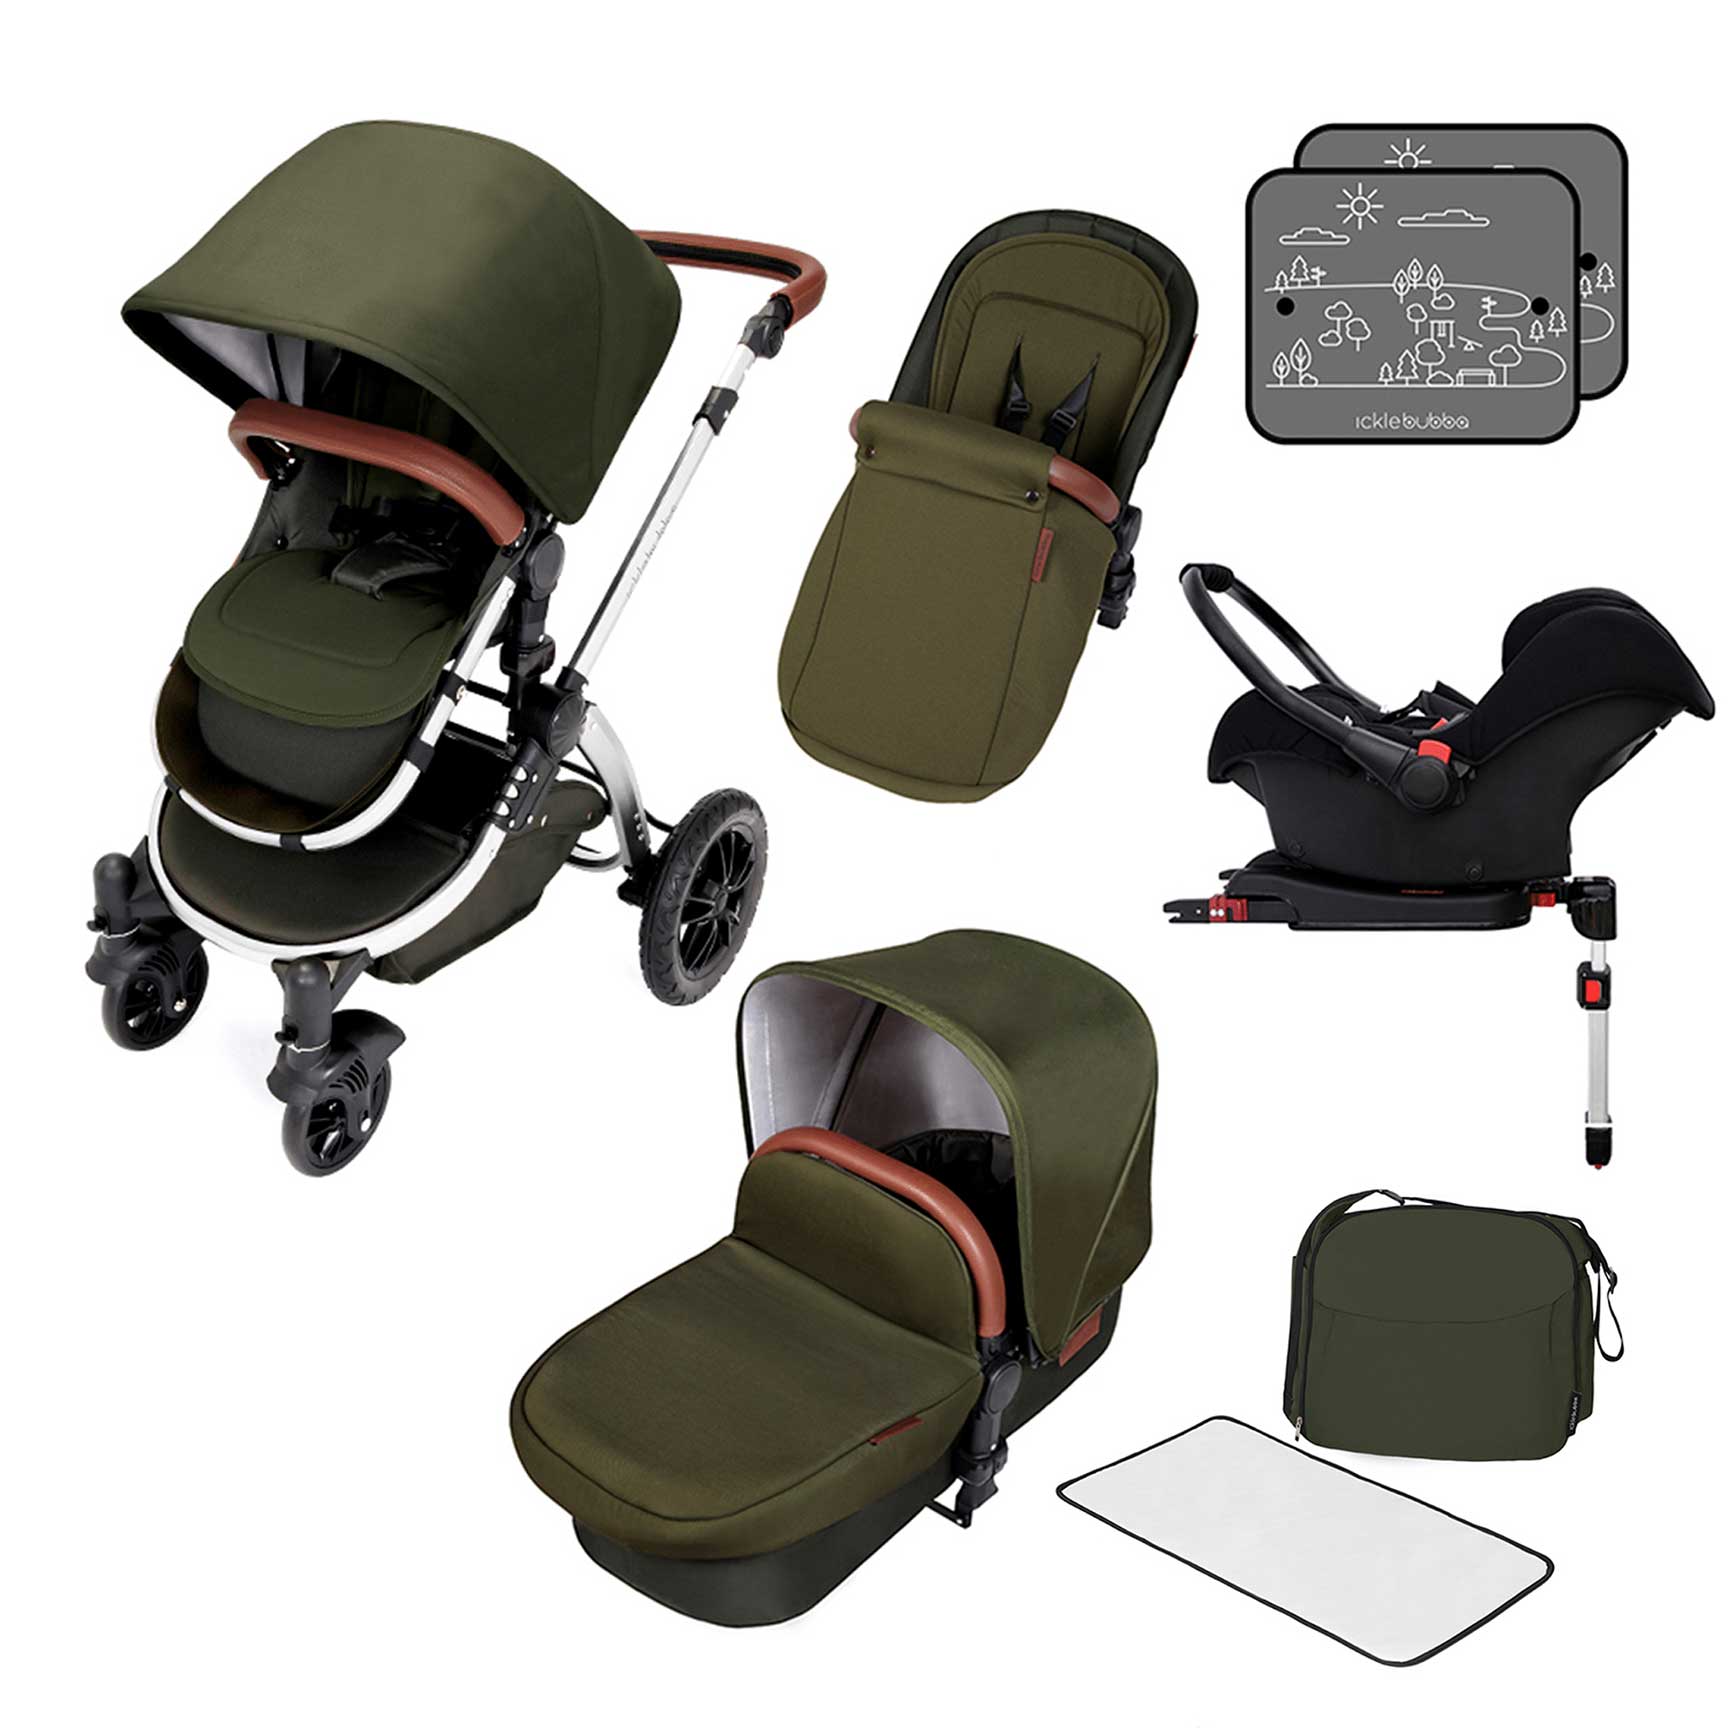 Ickle Bubba travel systems Ickle Bubba Stomp V4 Galaxy Travel System With Base Chrome/Woodland 10-004-200-029